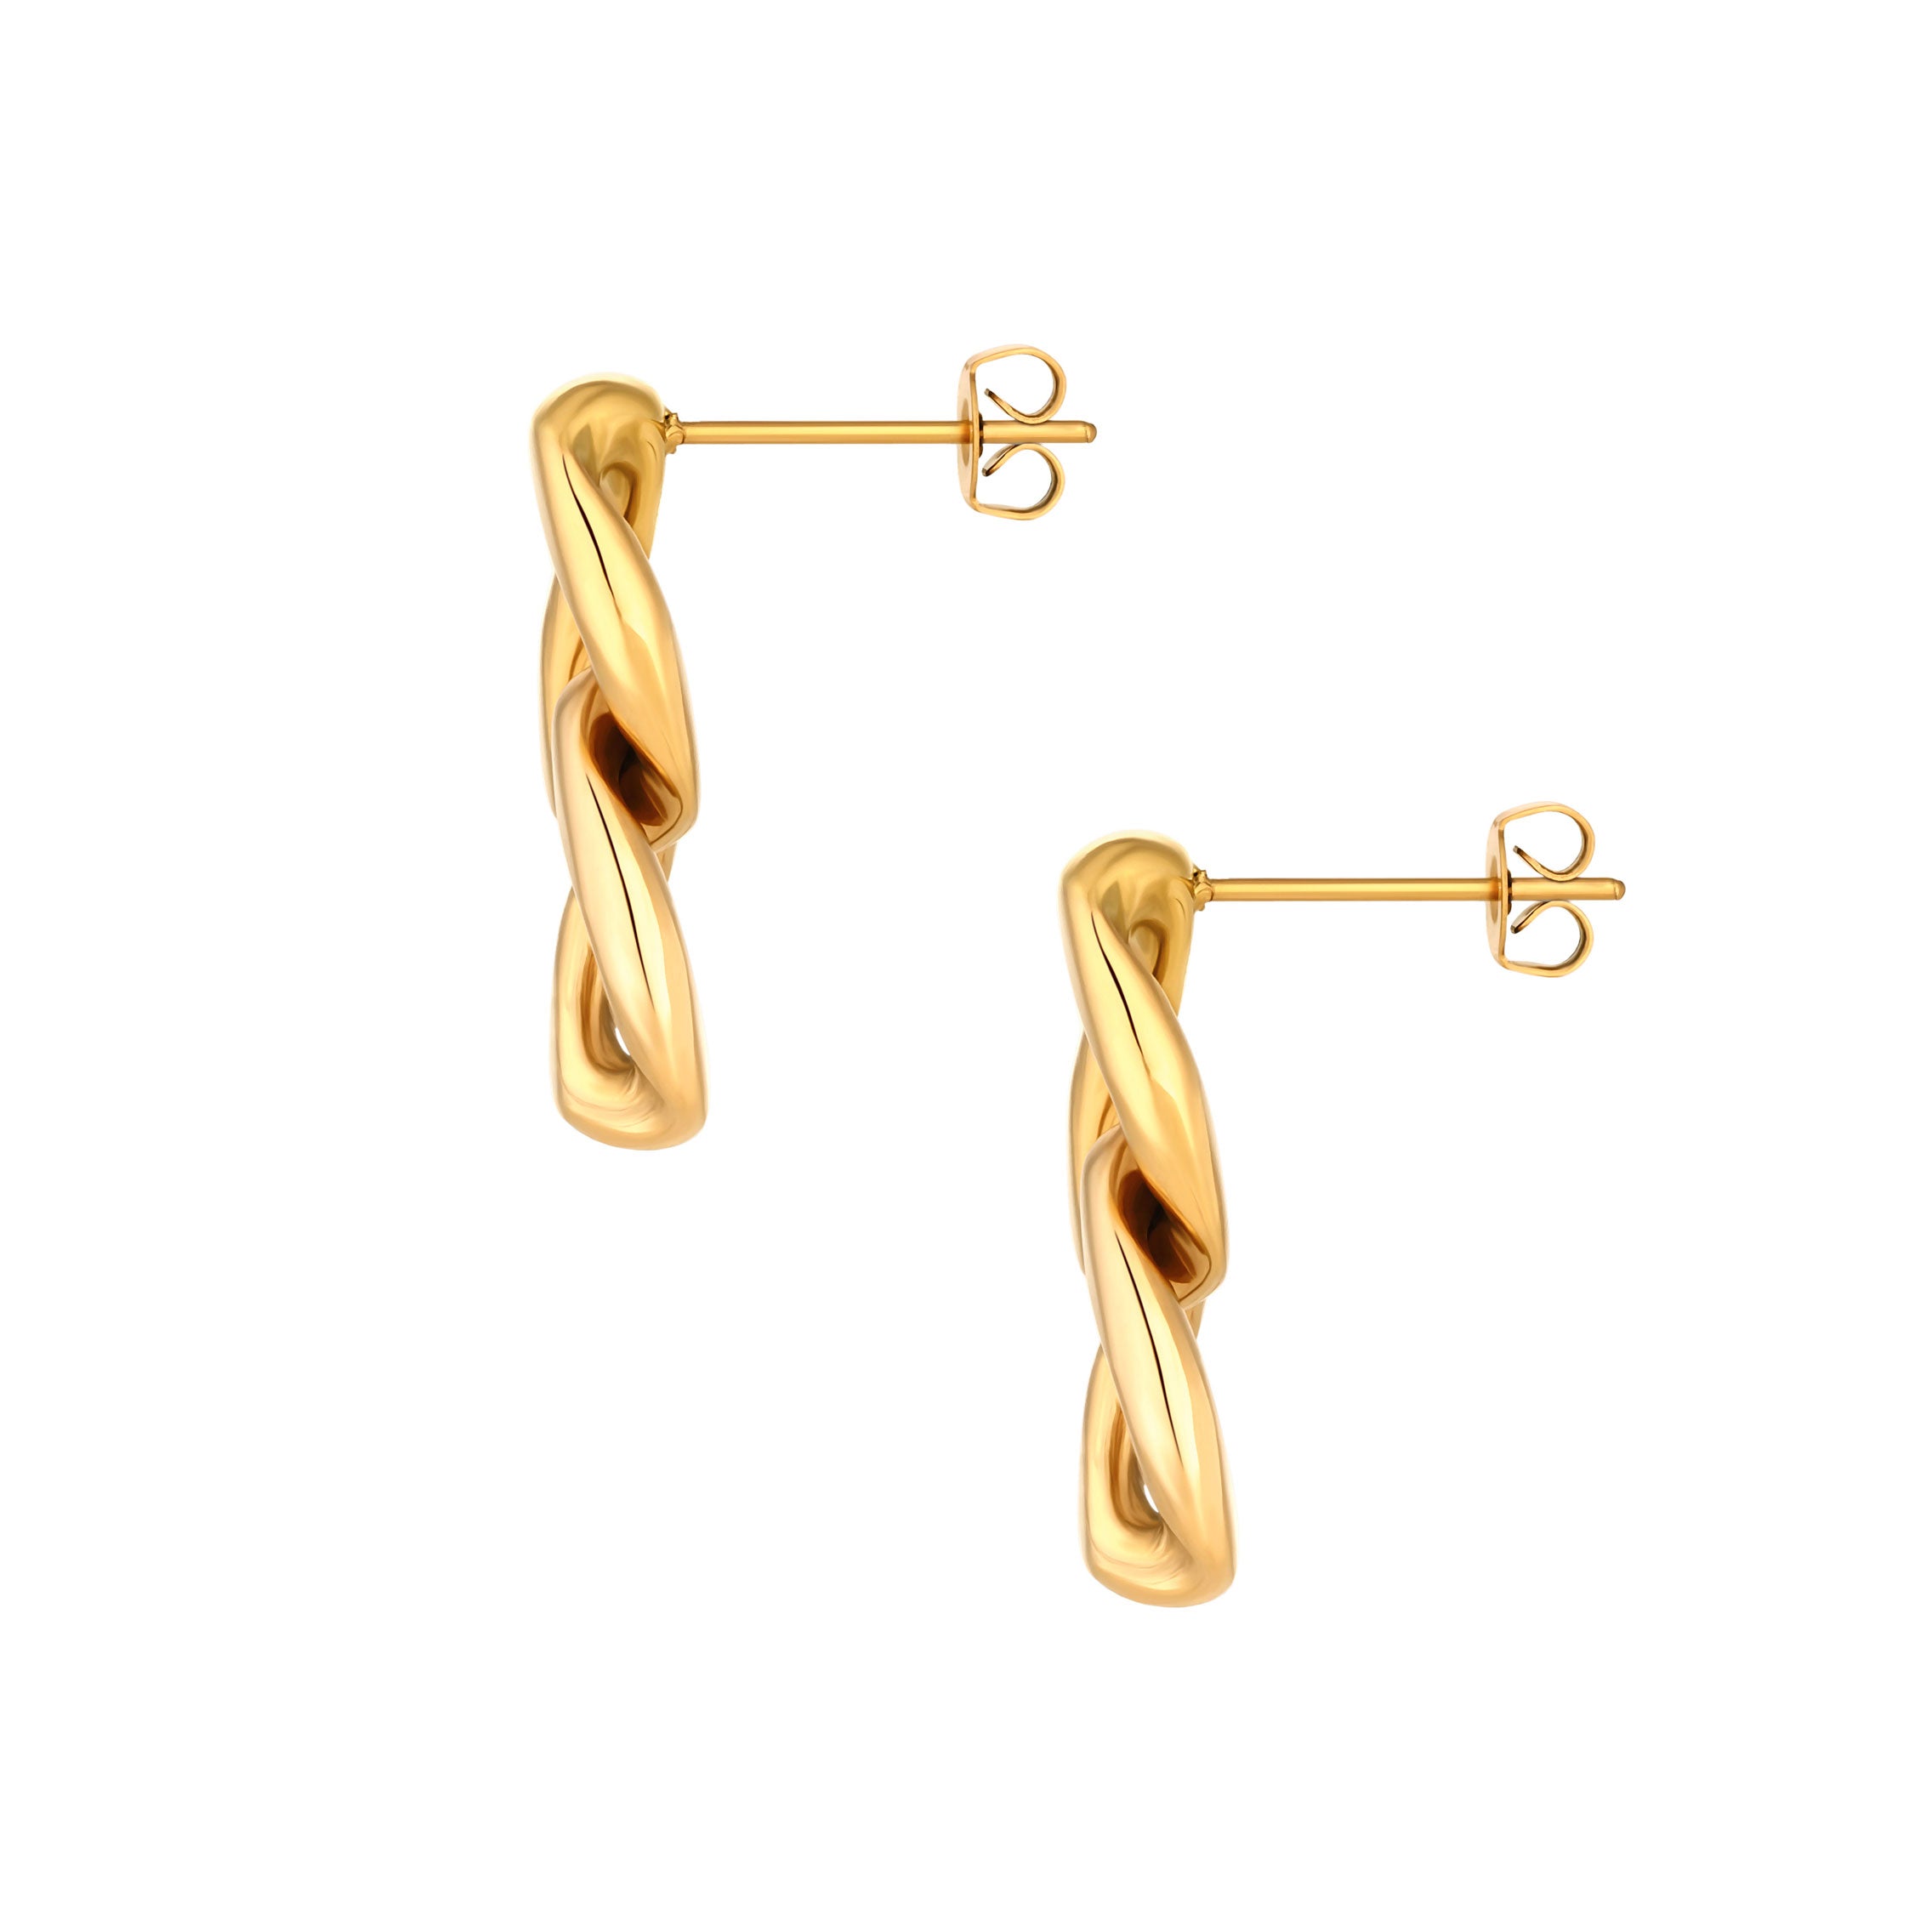 CHAINS EARRINGS - GOLD